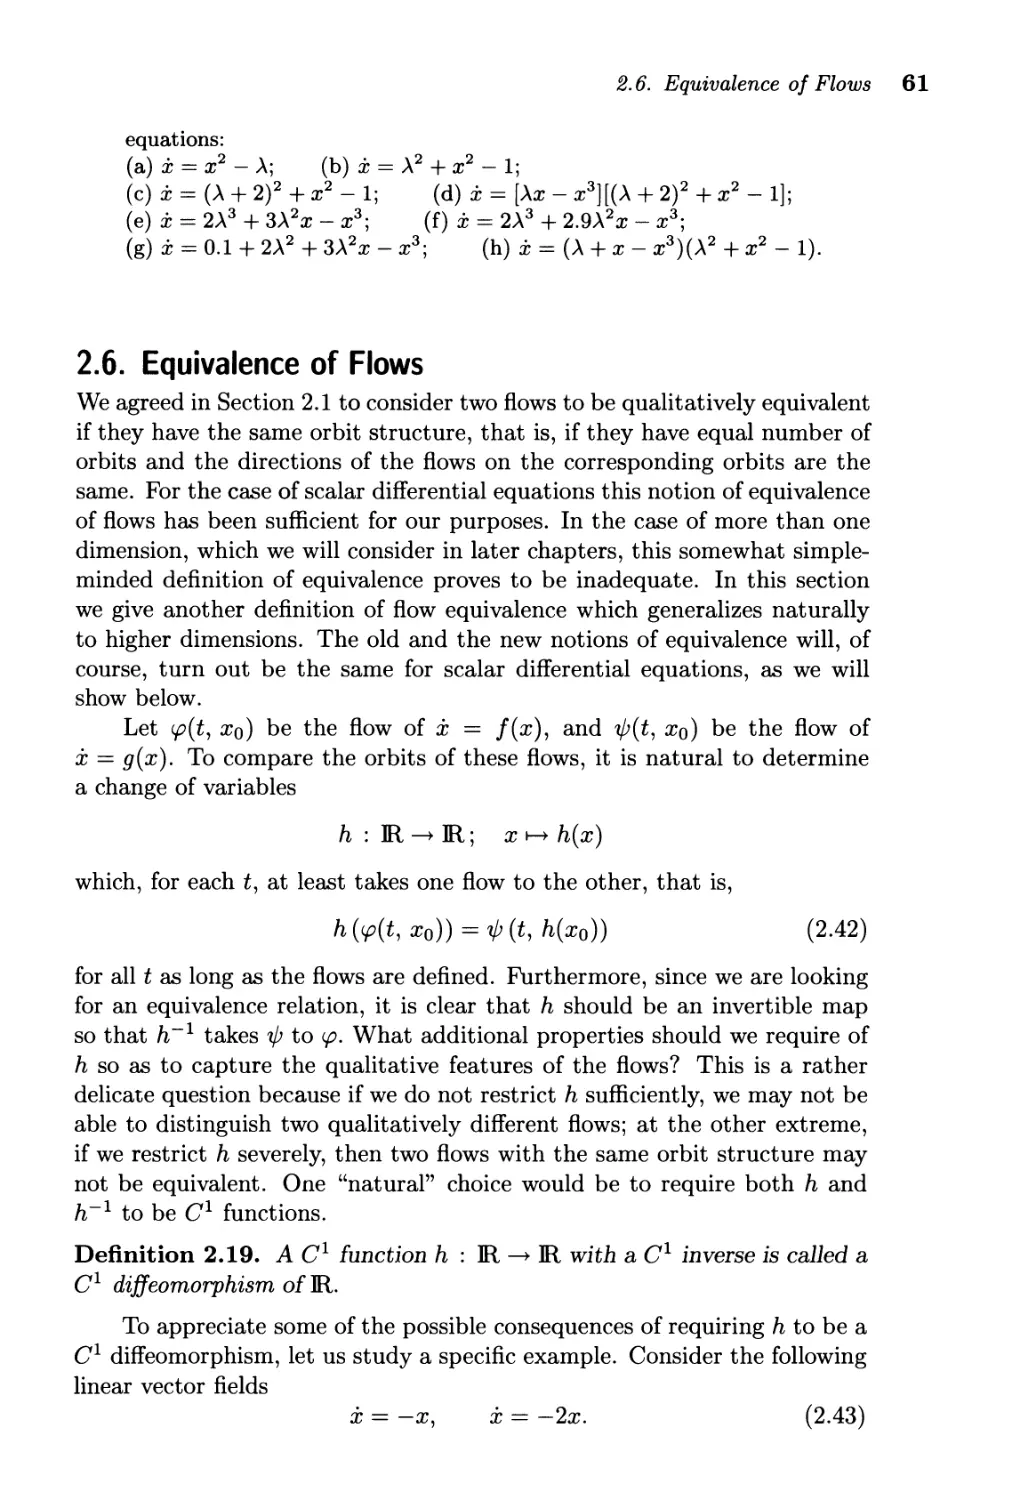 2.6. Equivalence of Flows